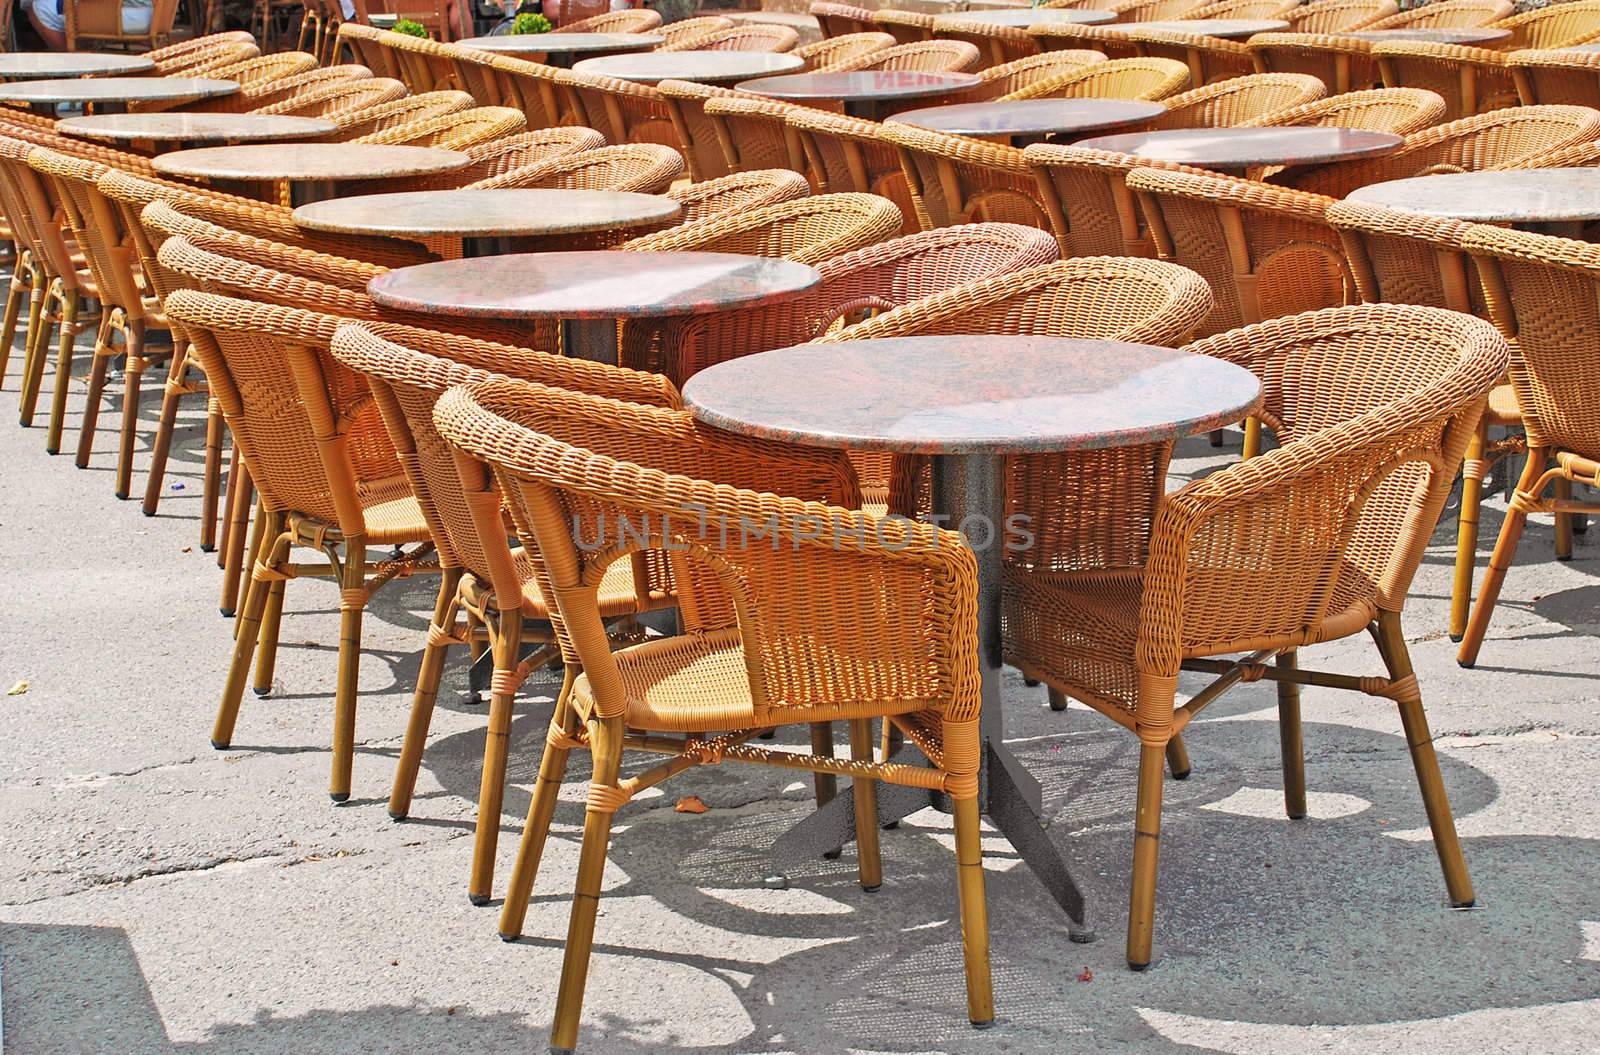 restaurant street terrace with wicker chairs and round tables